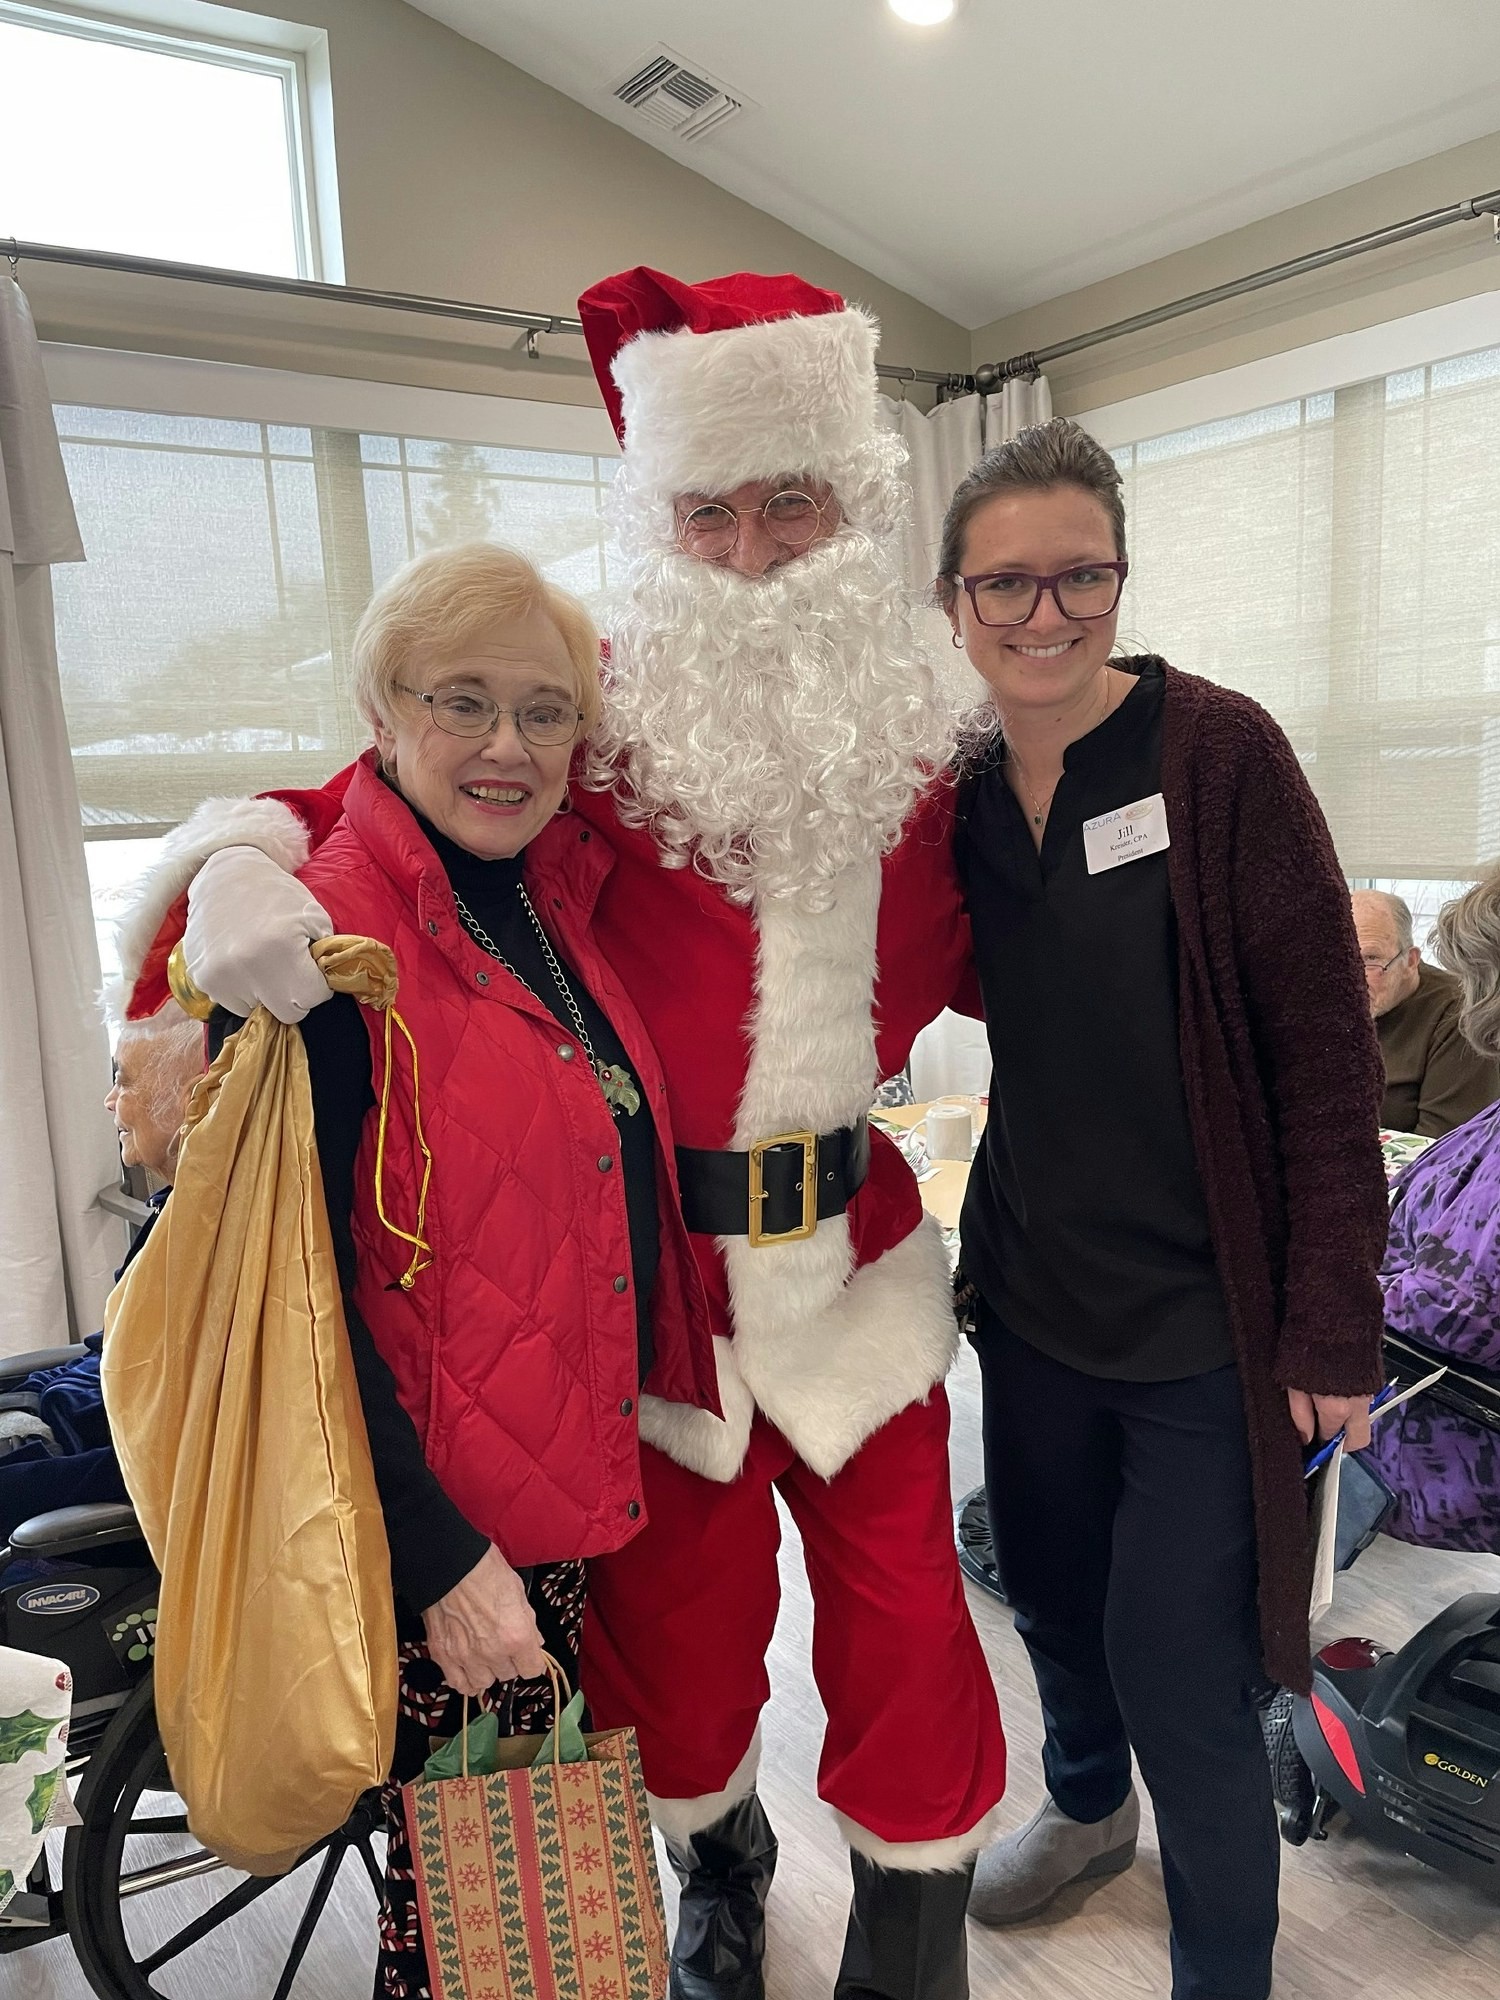 Santa paid a visit to our team and residents at Azura!